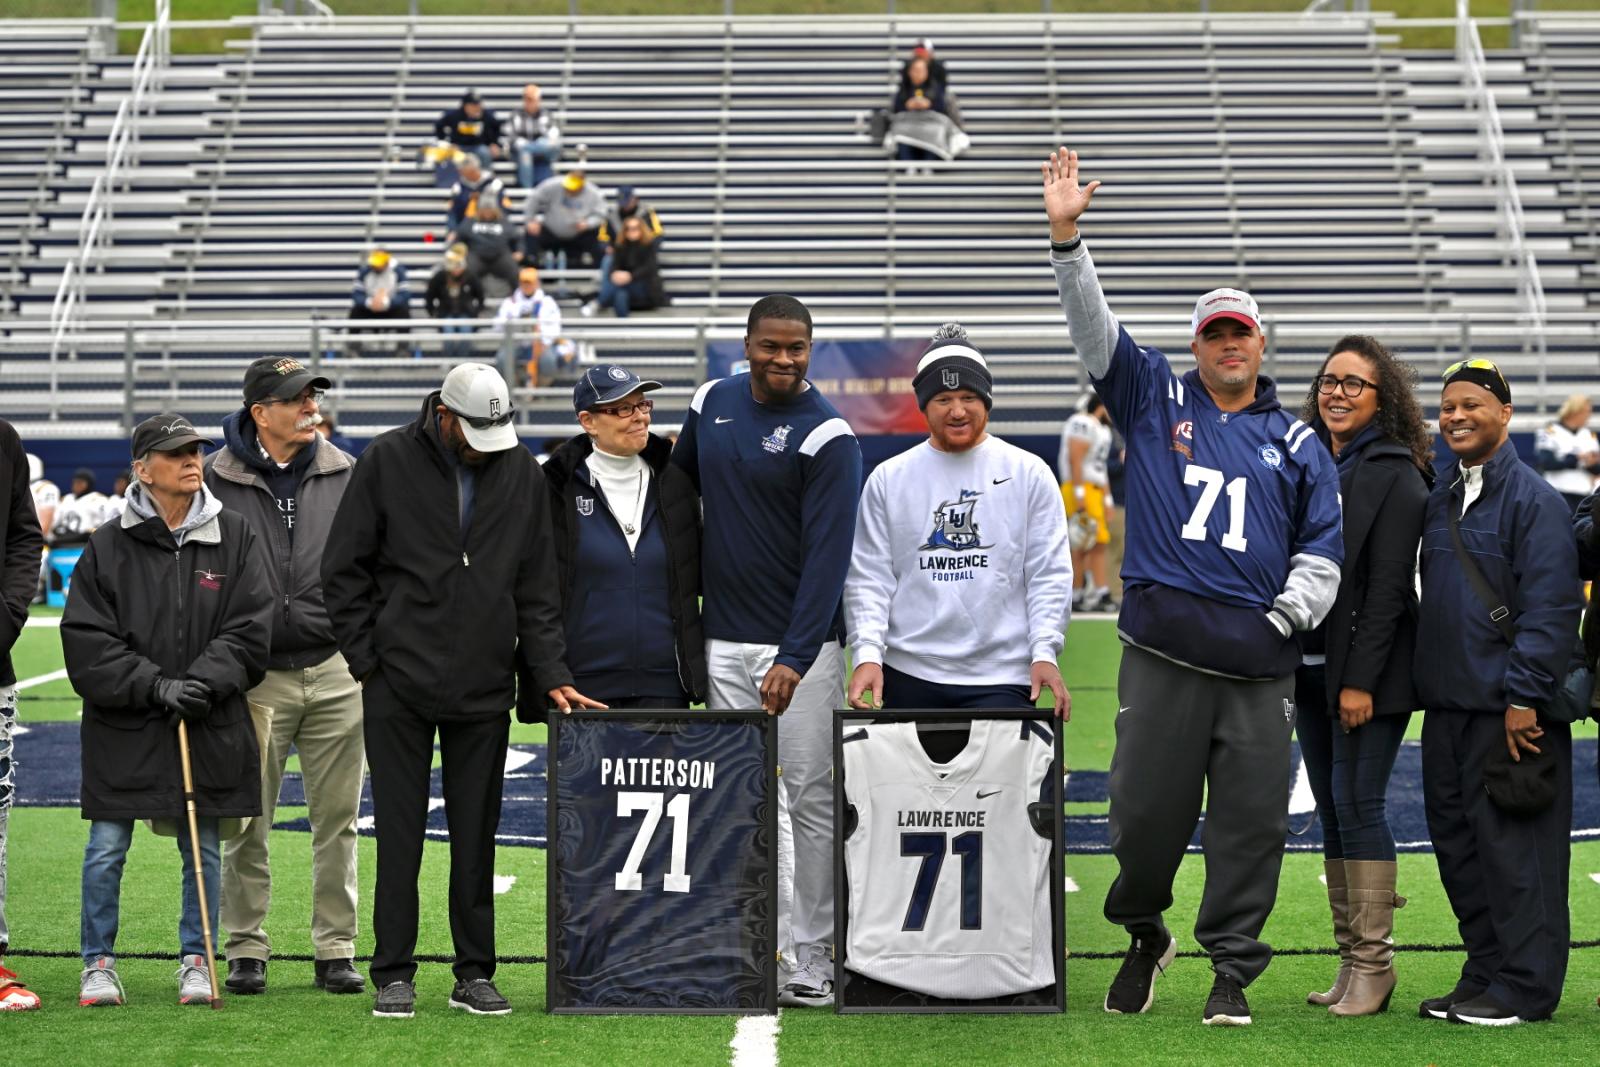 Coach Tony Aker joins members of Joe Patterson's family on the field to celebrate the No. 71 being retired.